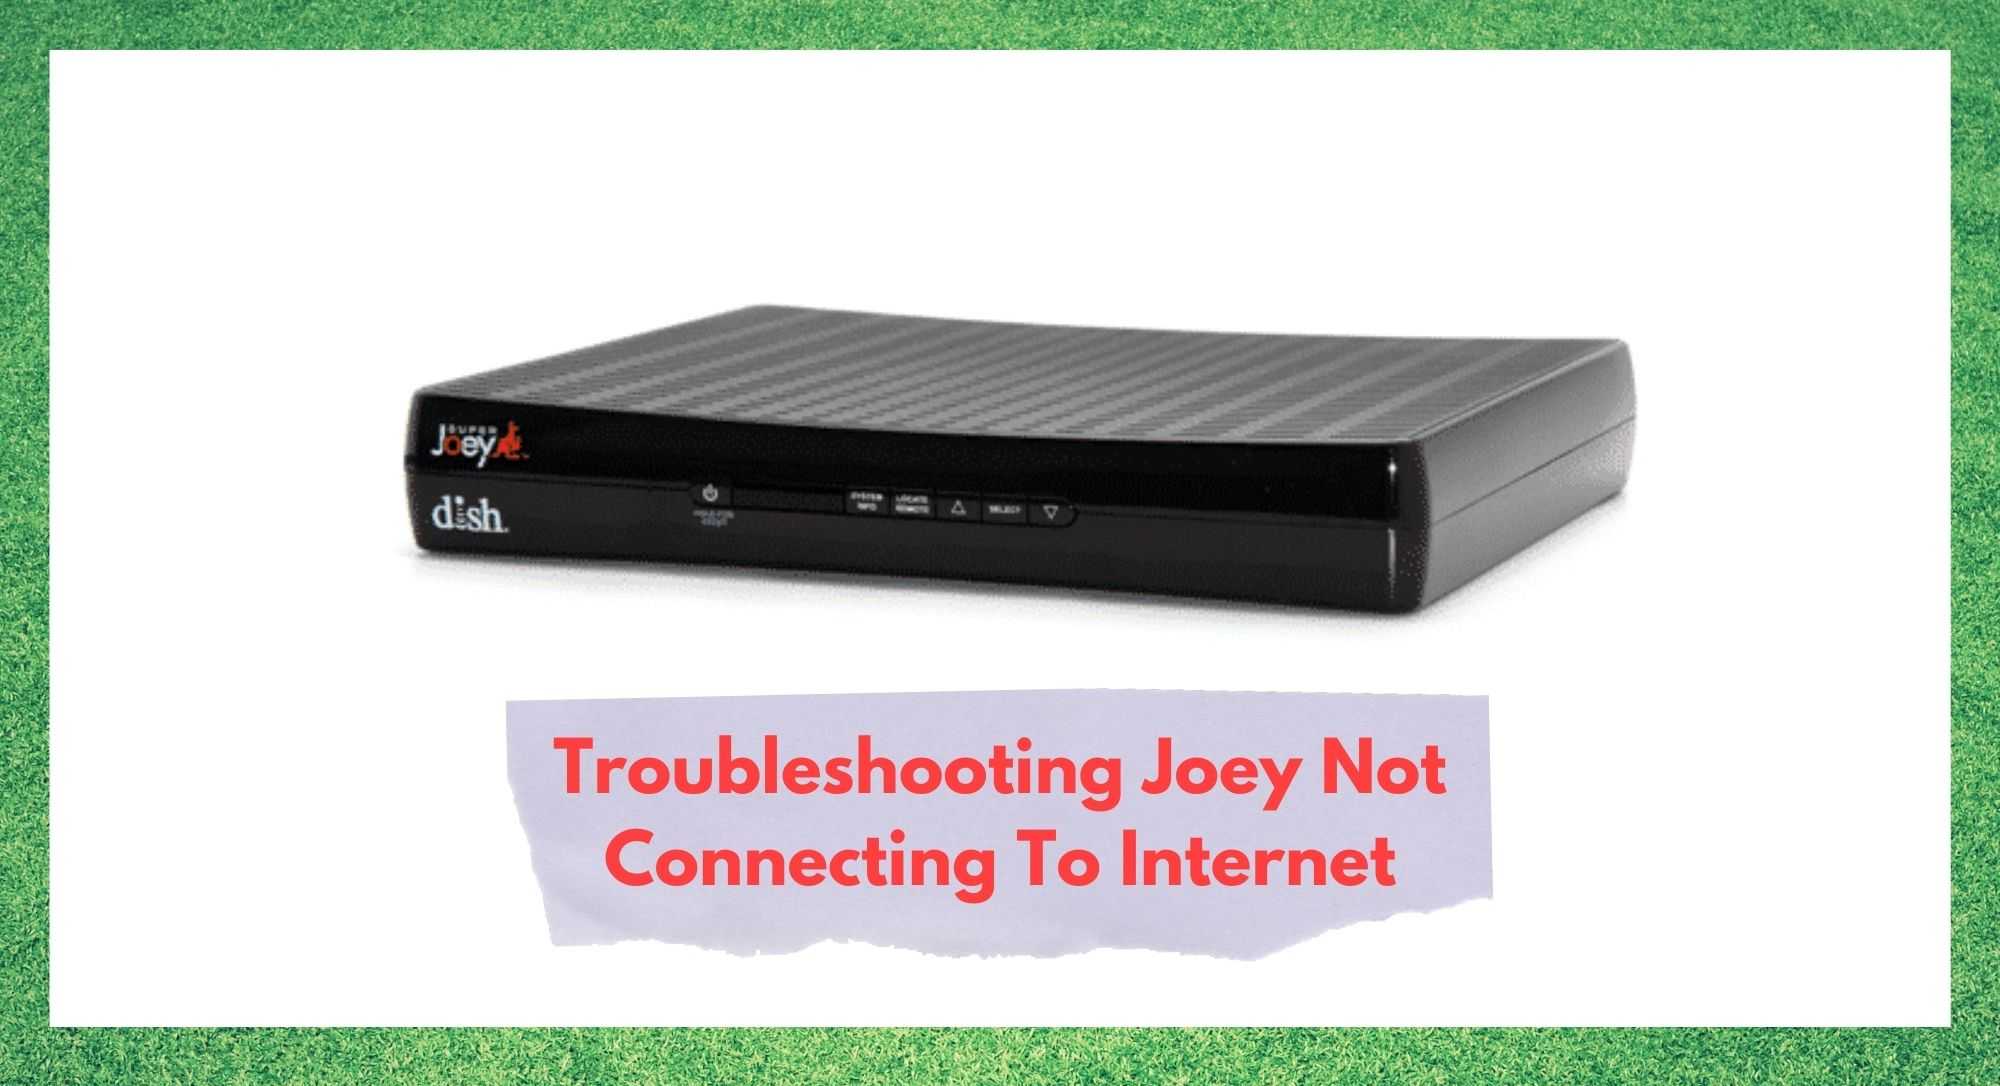 joey not connecting to internet